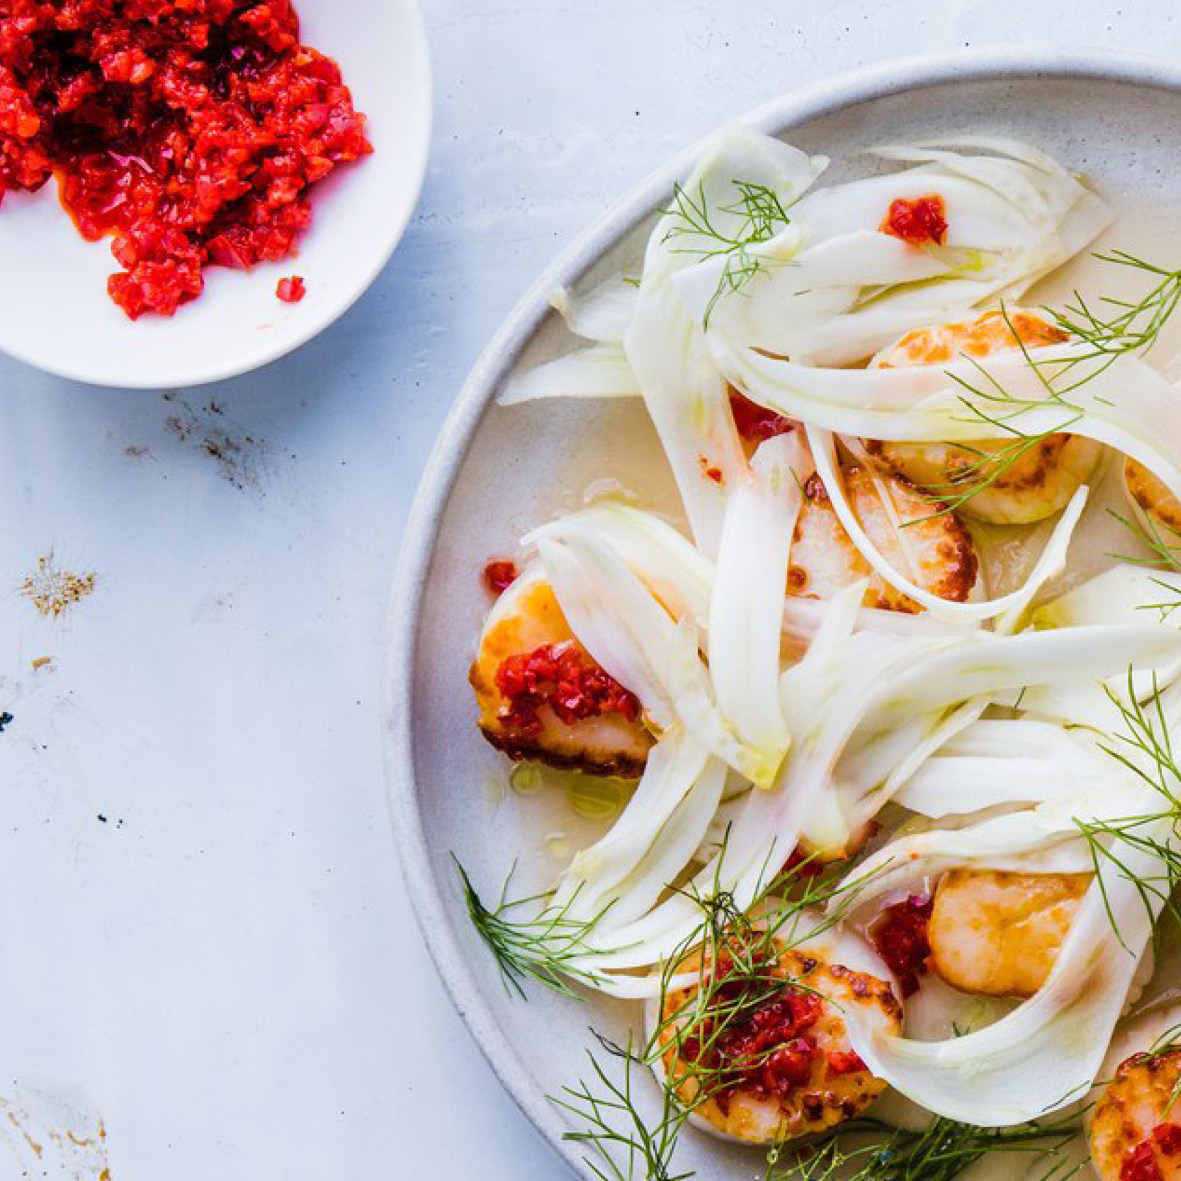 seared_scallops_with_red_chile_paste_and_fennel_salad.jpg